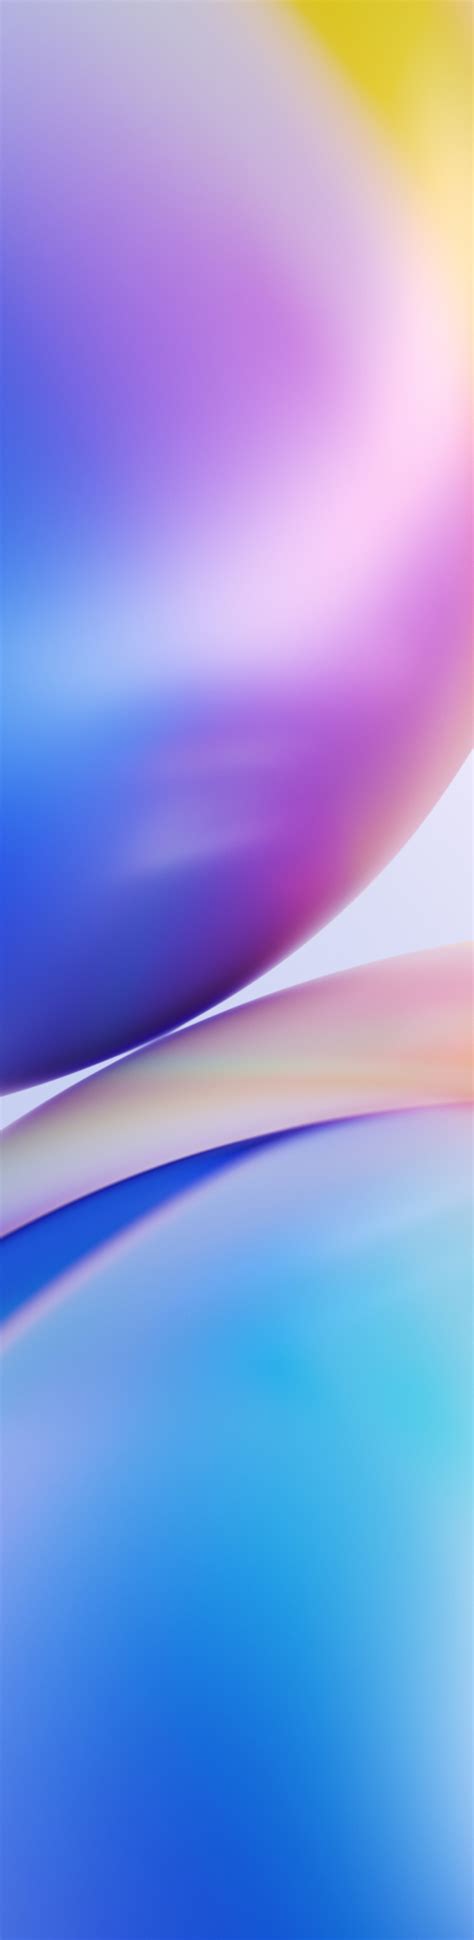 500x2048 Oneplus 8 Pro 500x2048 Resolution Wallpaper Hd Abstract 4k